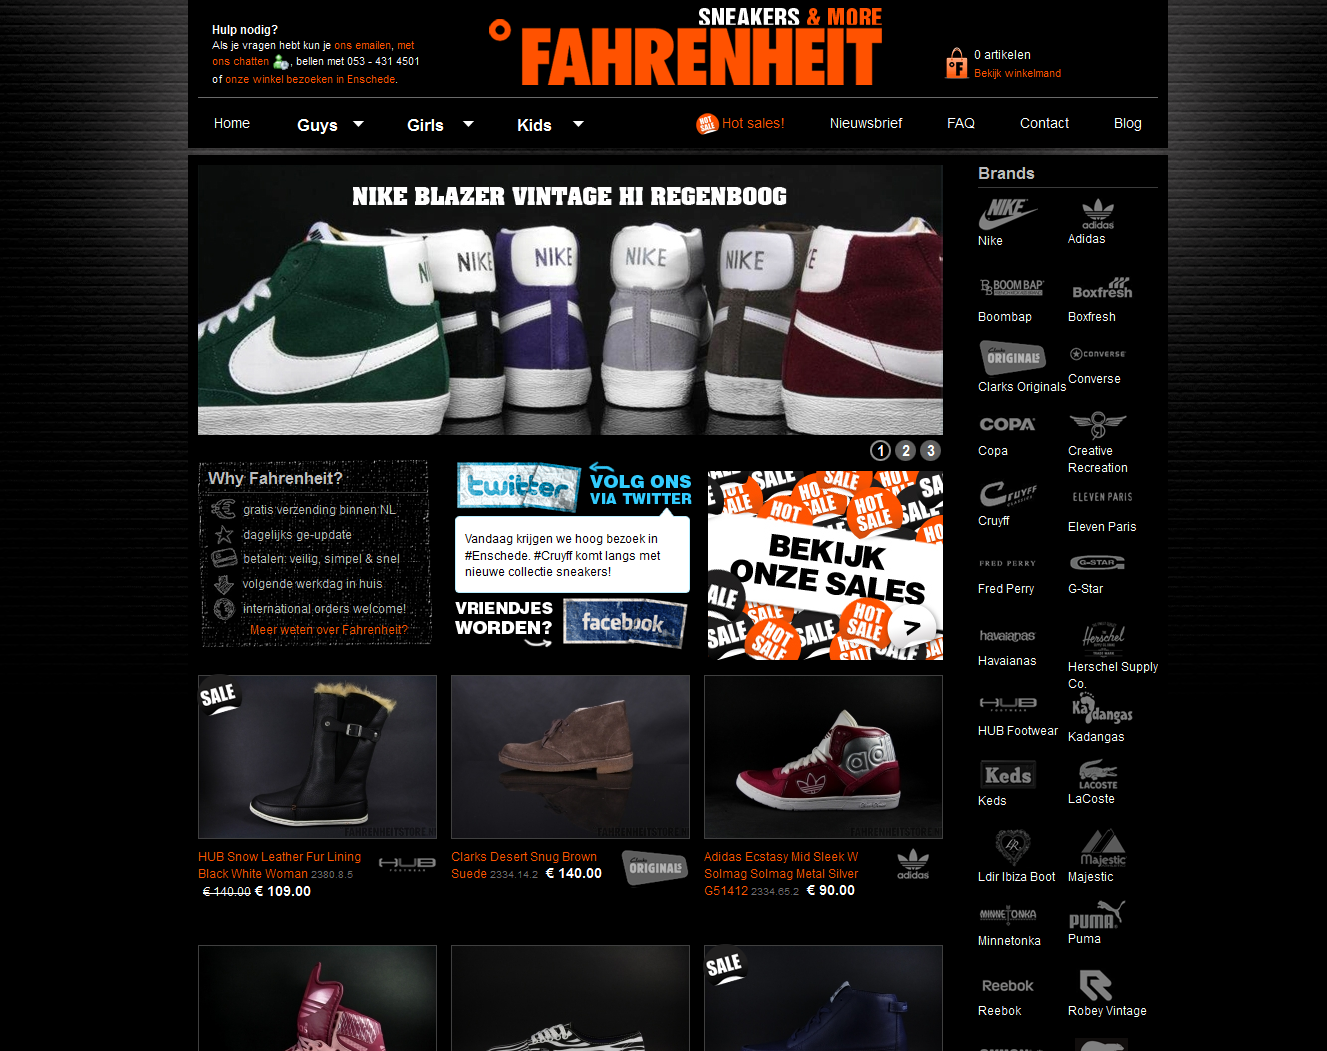 Fahrenheitstore.nl (new and improved!) (Fuzz10)